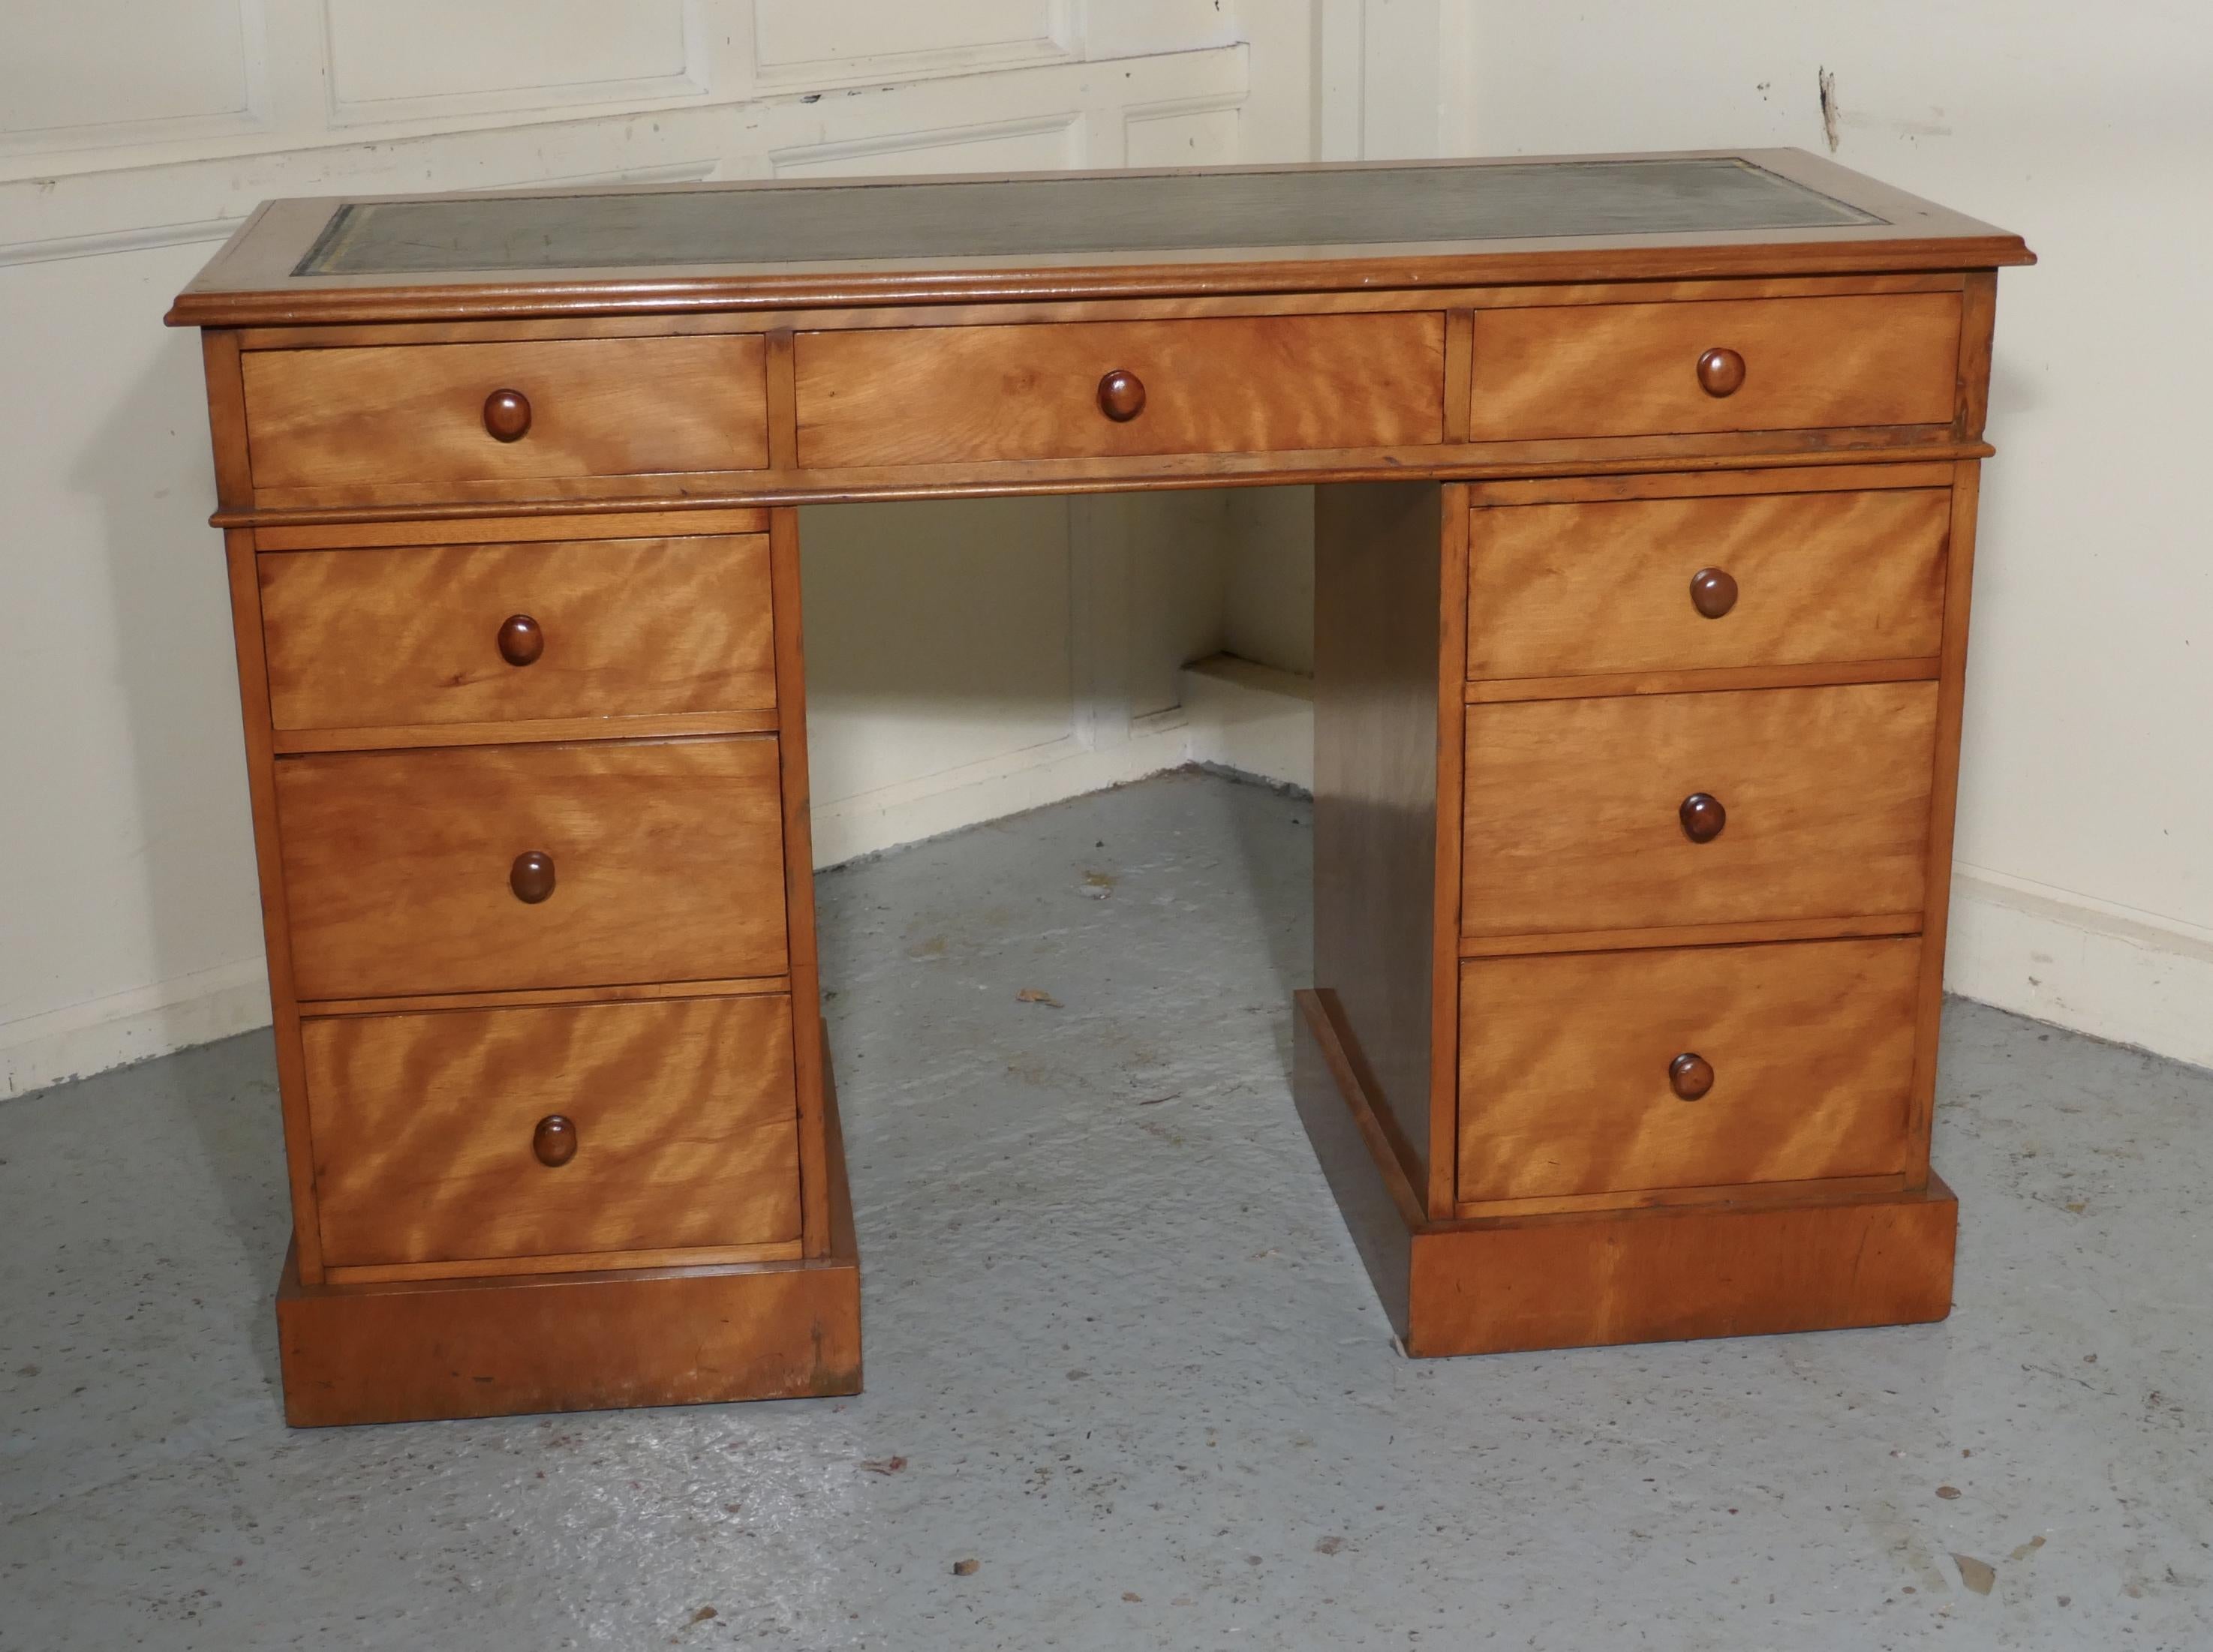 A Victorian Good Quality Pedestal Desk 

The desk is made in one of the loveliest woods, figured Birch which has a wonderful dark gold colour, each of the pedestals has three graduated drawers and the top section also has three drawers across the